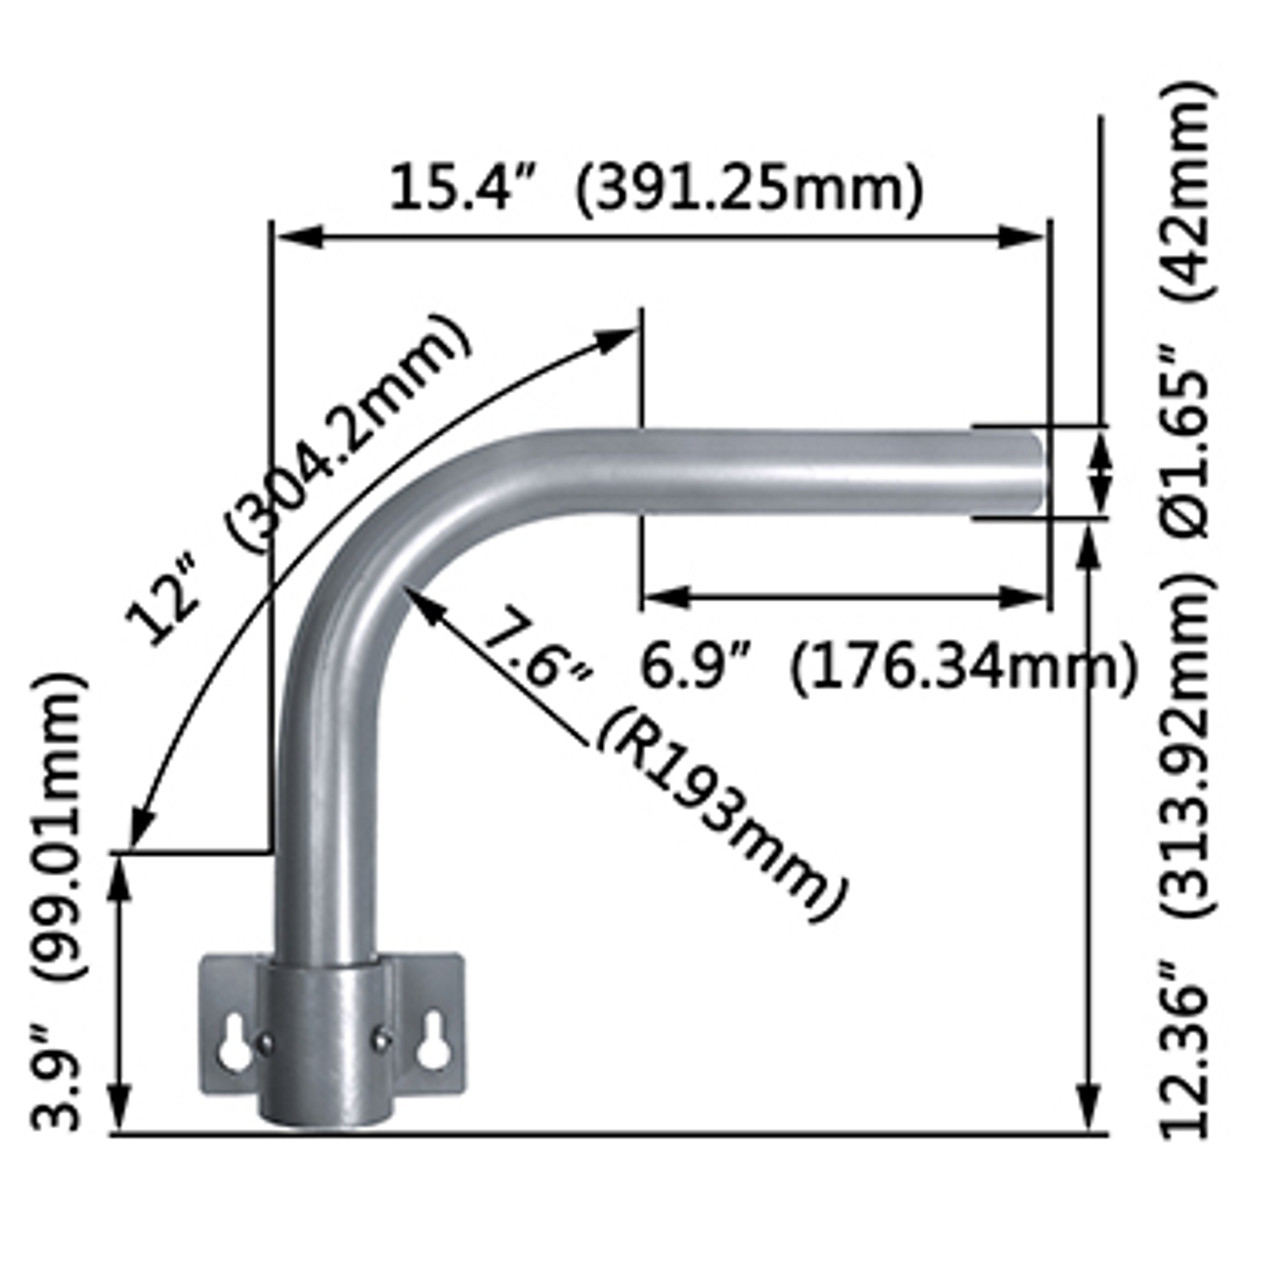 Round Pole Adapter and Support for Wood poles and Walls, Dimensions